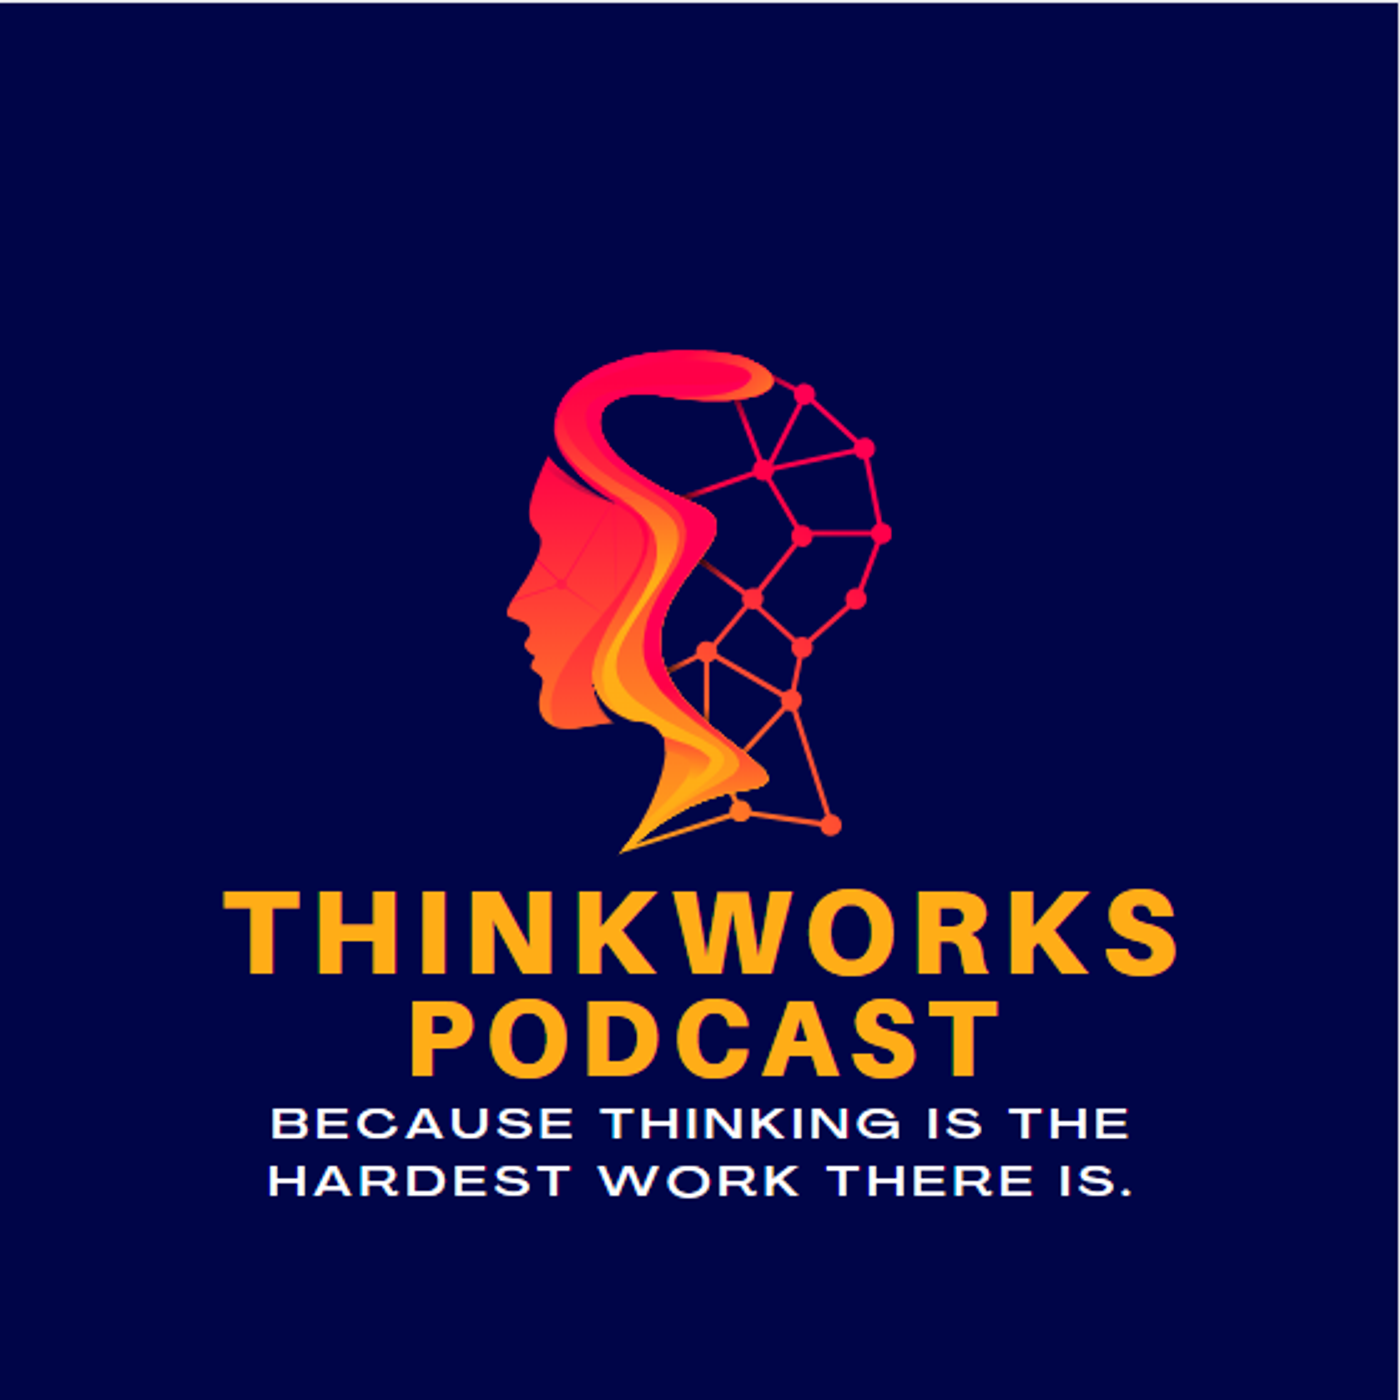 ThinkWORKS: Because Thinking Is The Hardest Work There Is. Image